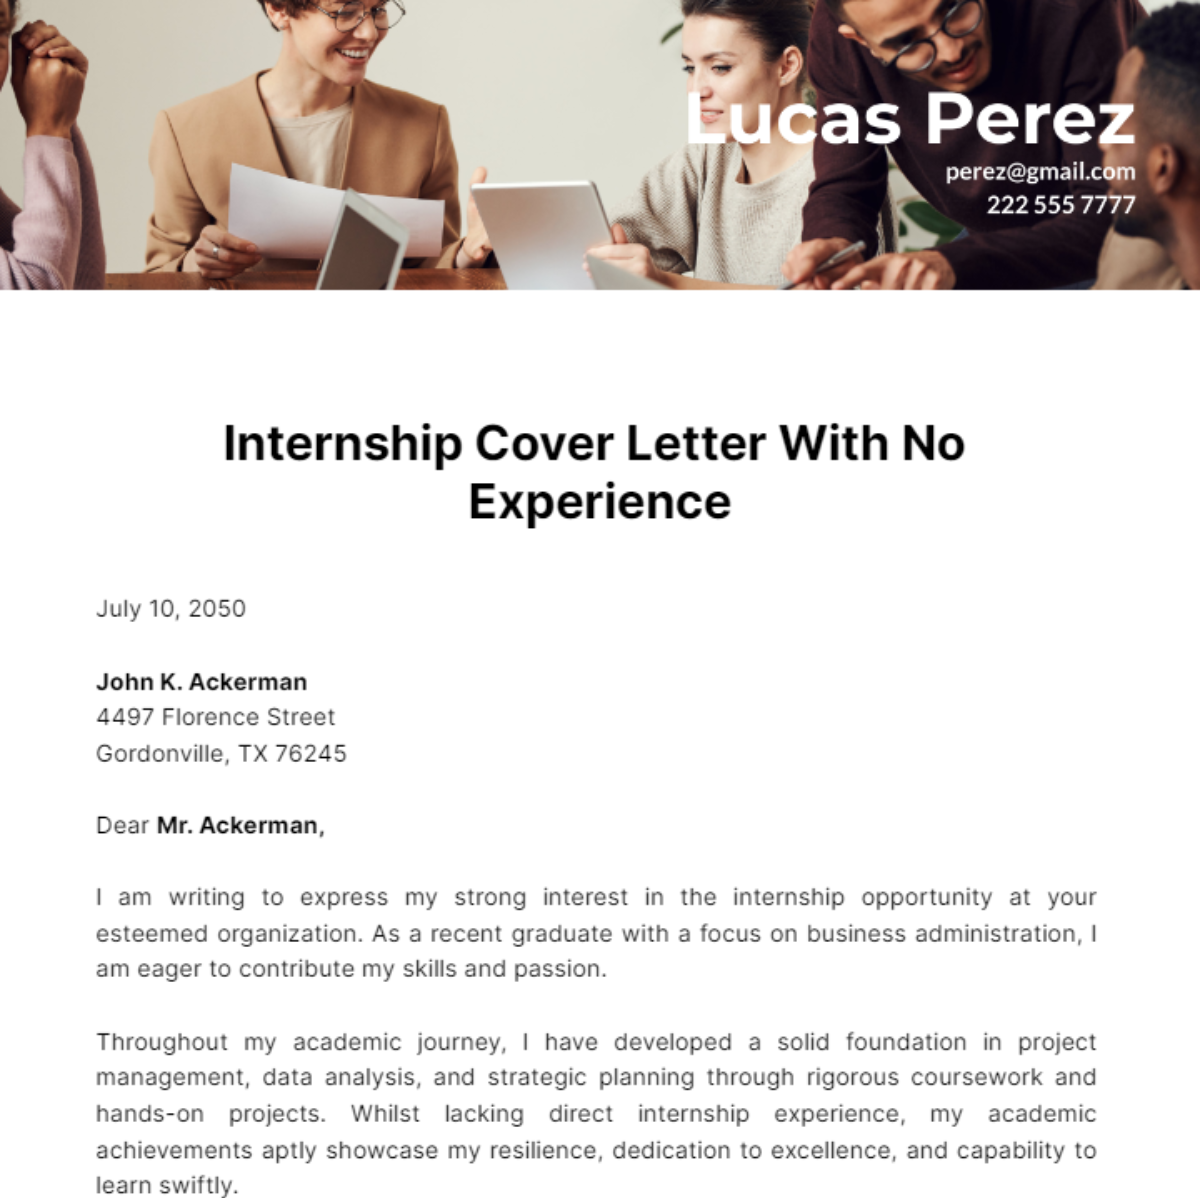 Internship Cover Letter With No Experience Template